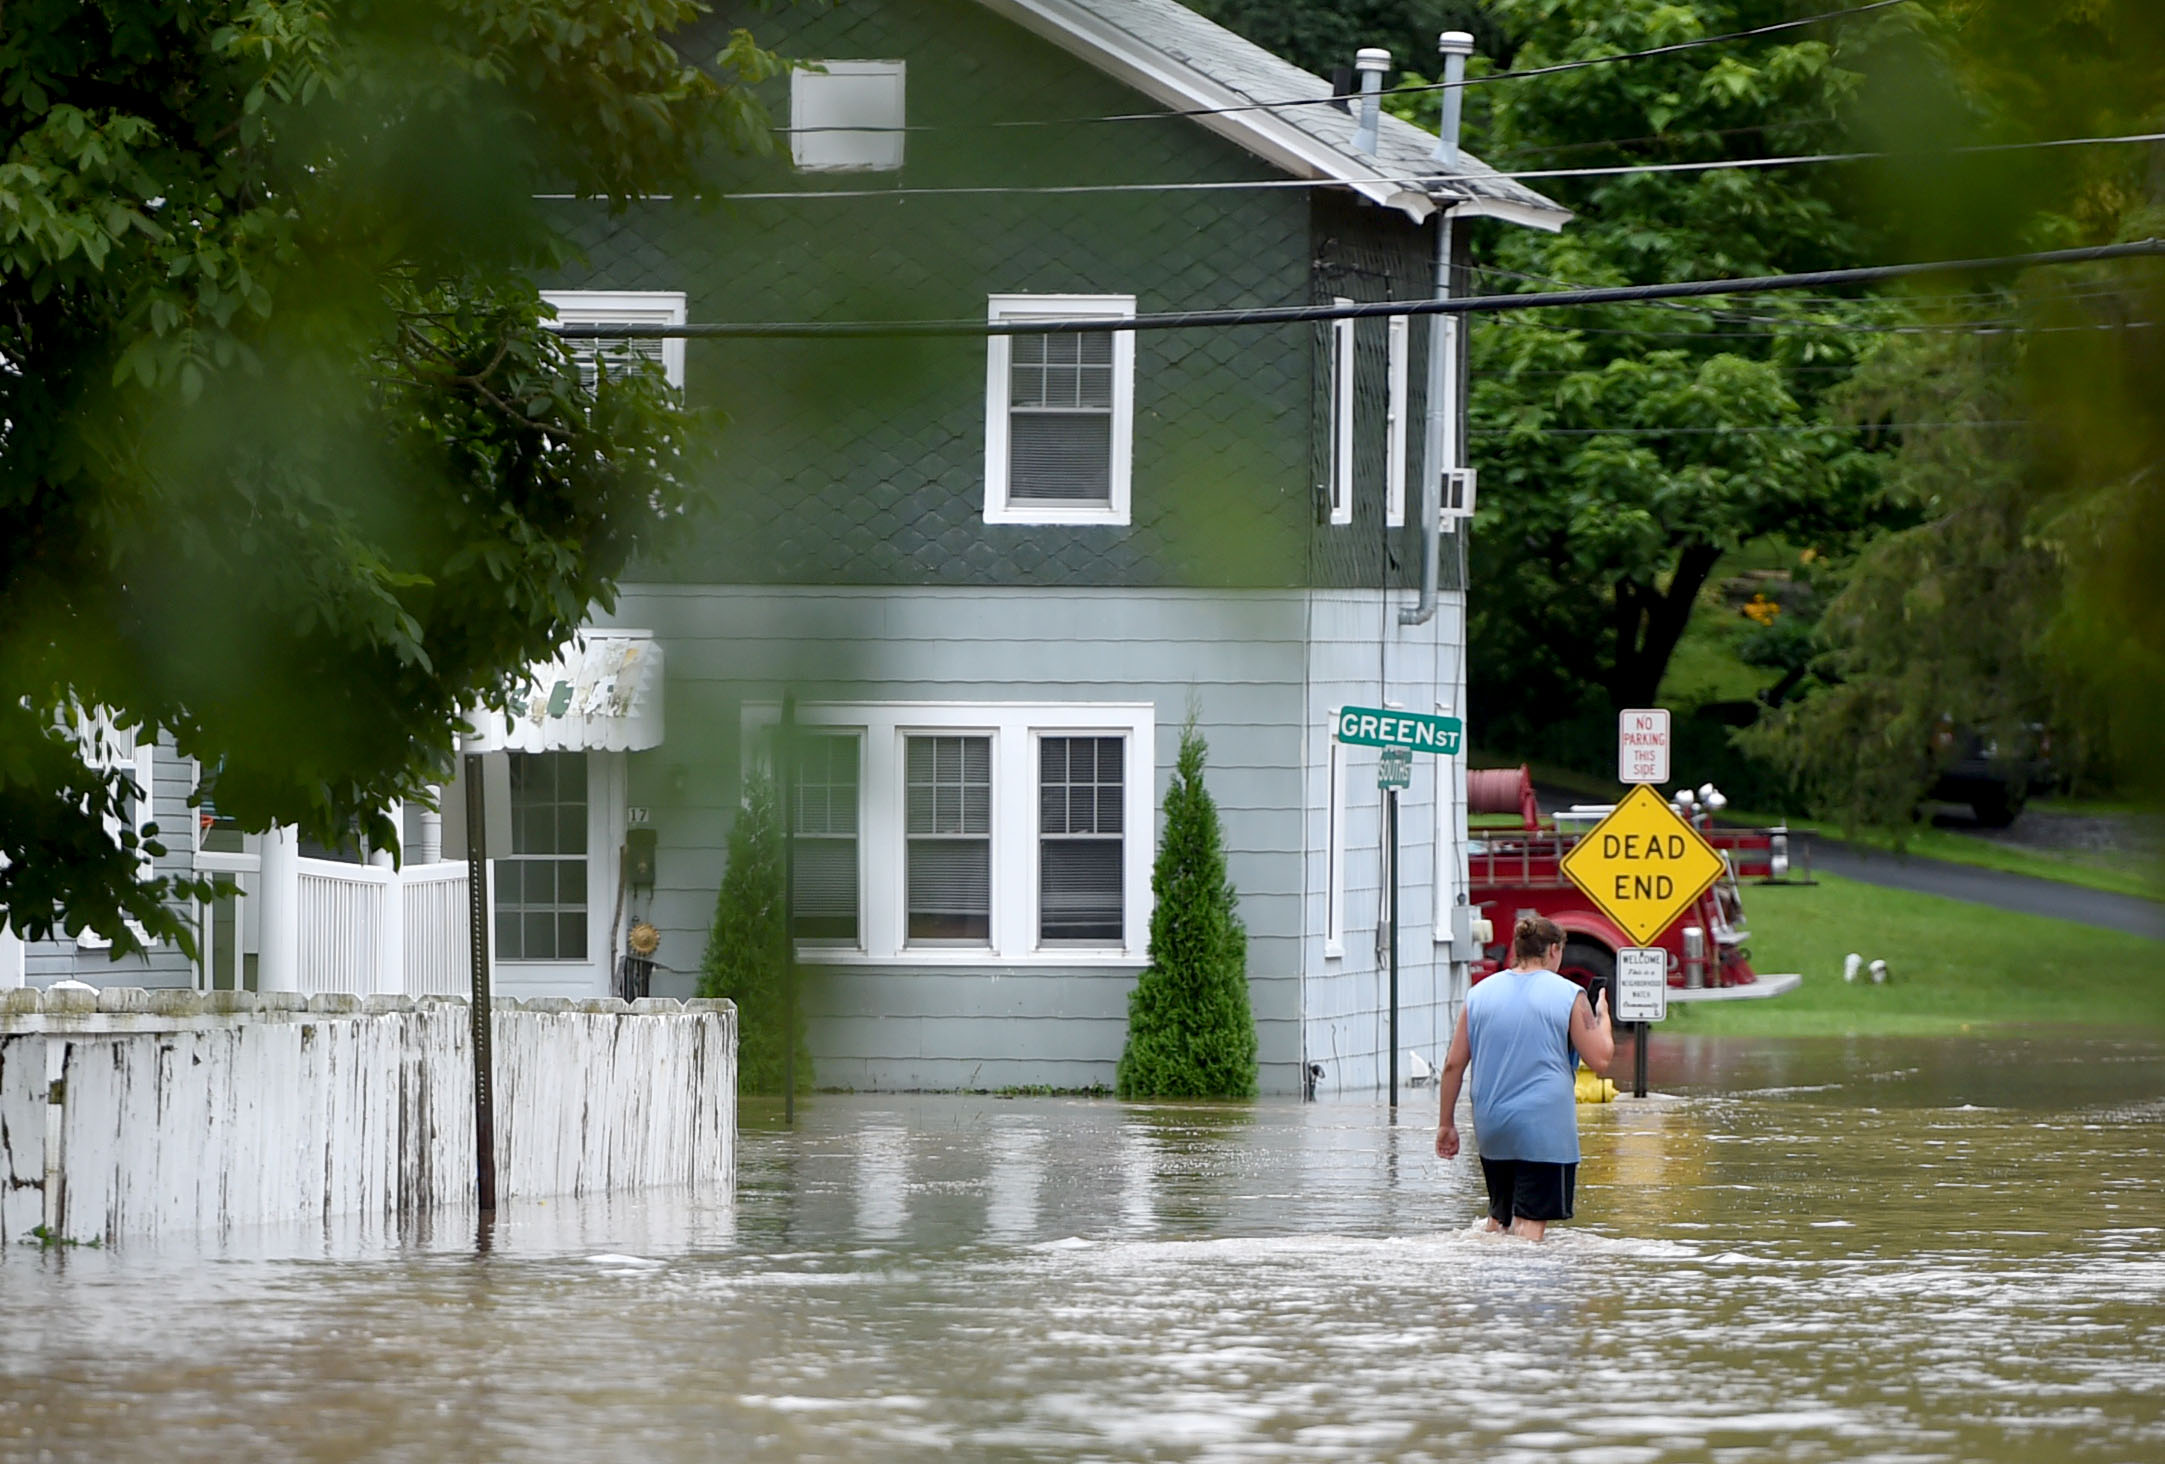 South and Green streets in the village of Camillus were under water August 19, 2021, after heavy rains caused flooding in Central New York. A lot of flooding occurred along Ninemile Creek in Camillus and Marcellus. Dennis Nett | dnett@syracuse.com